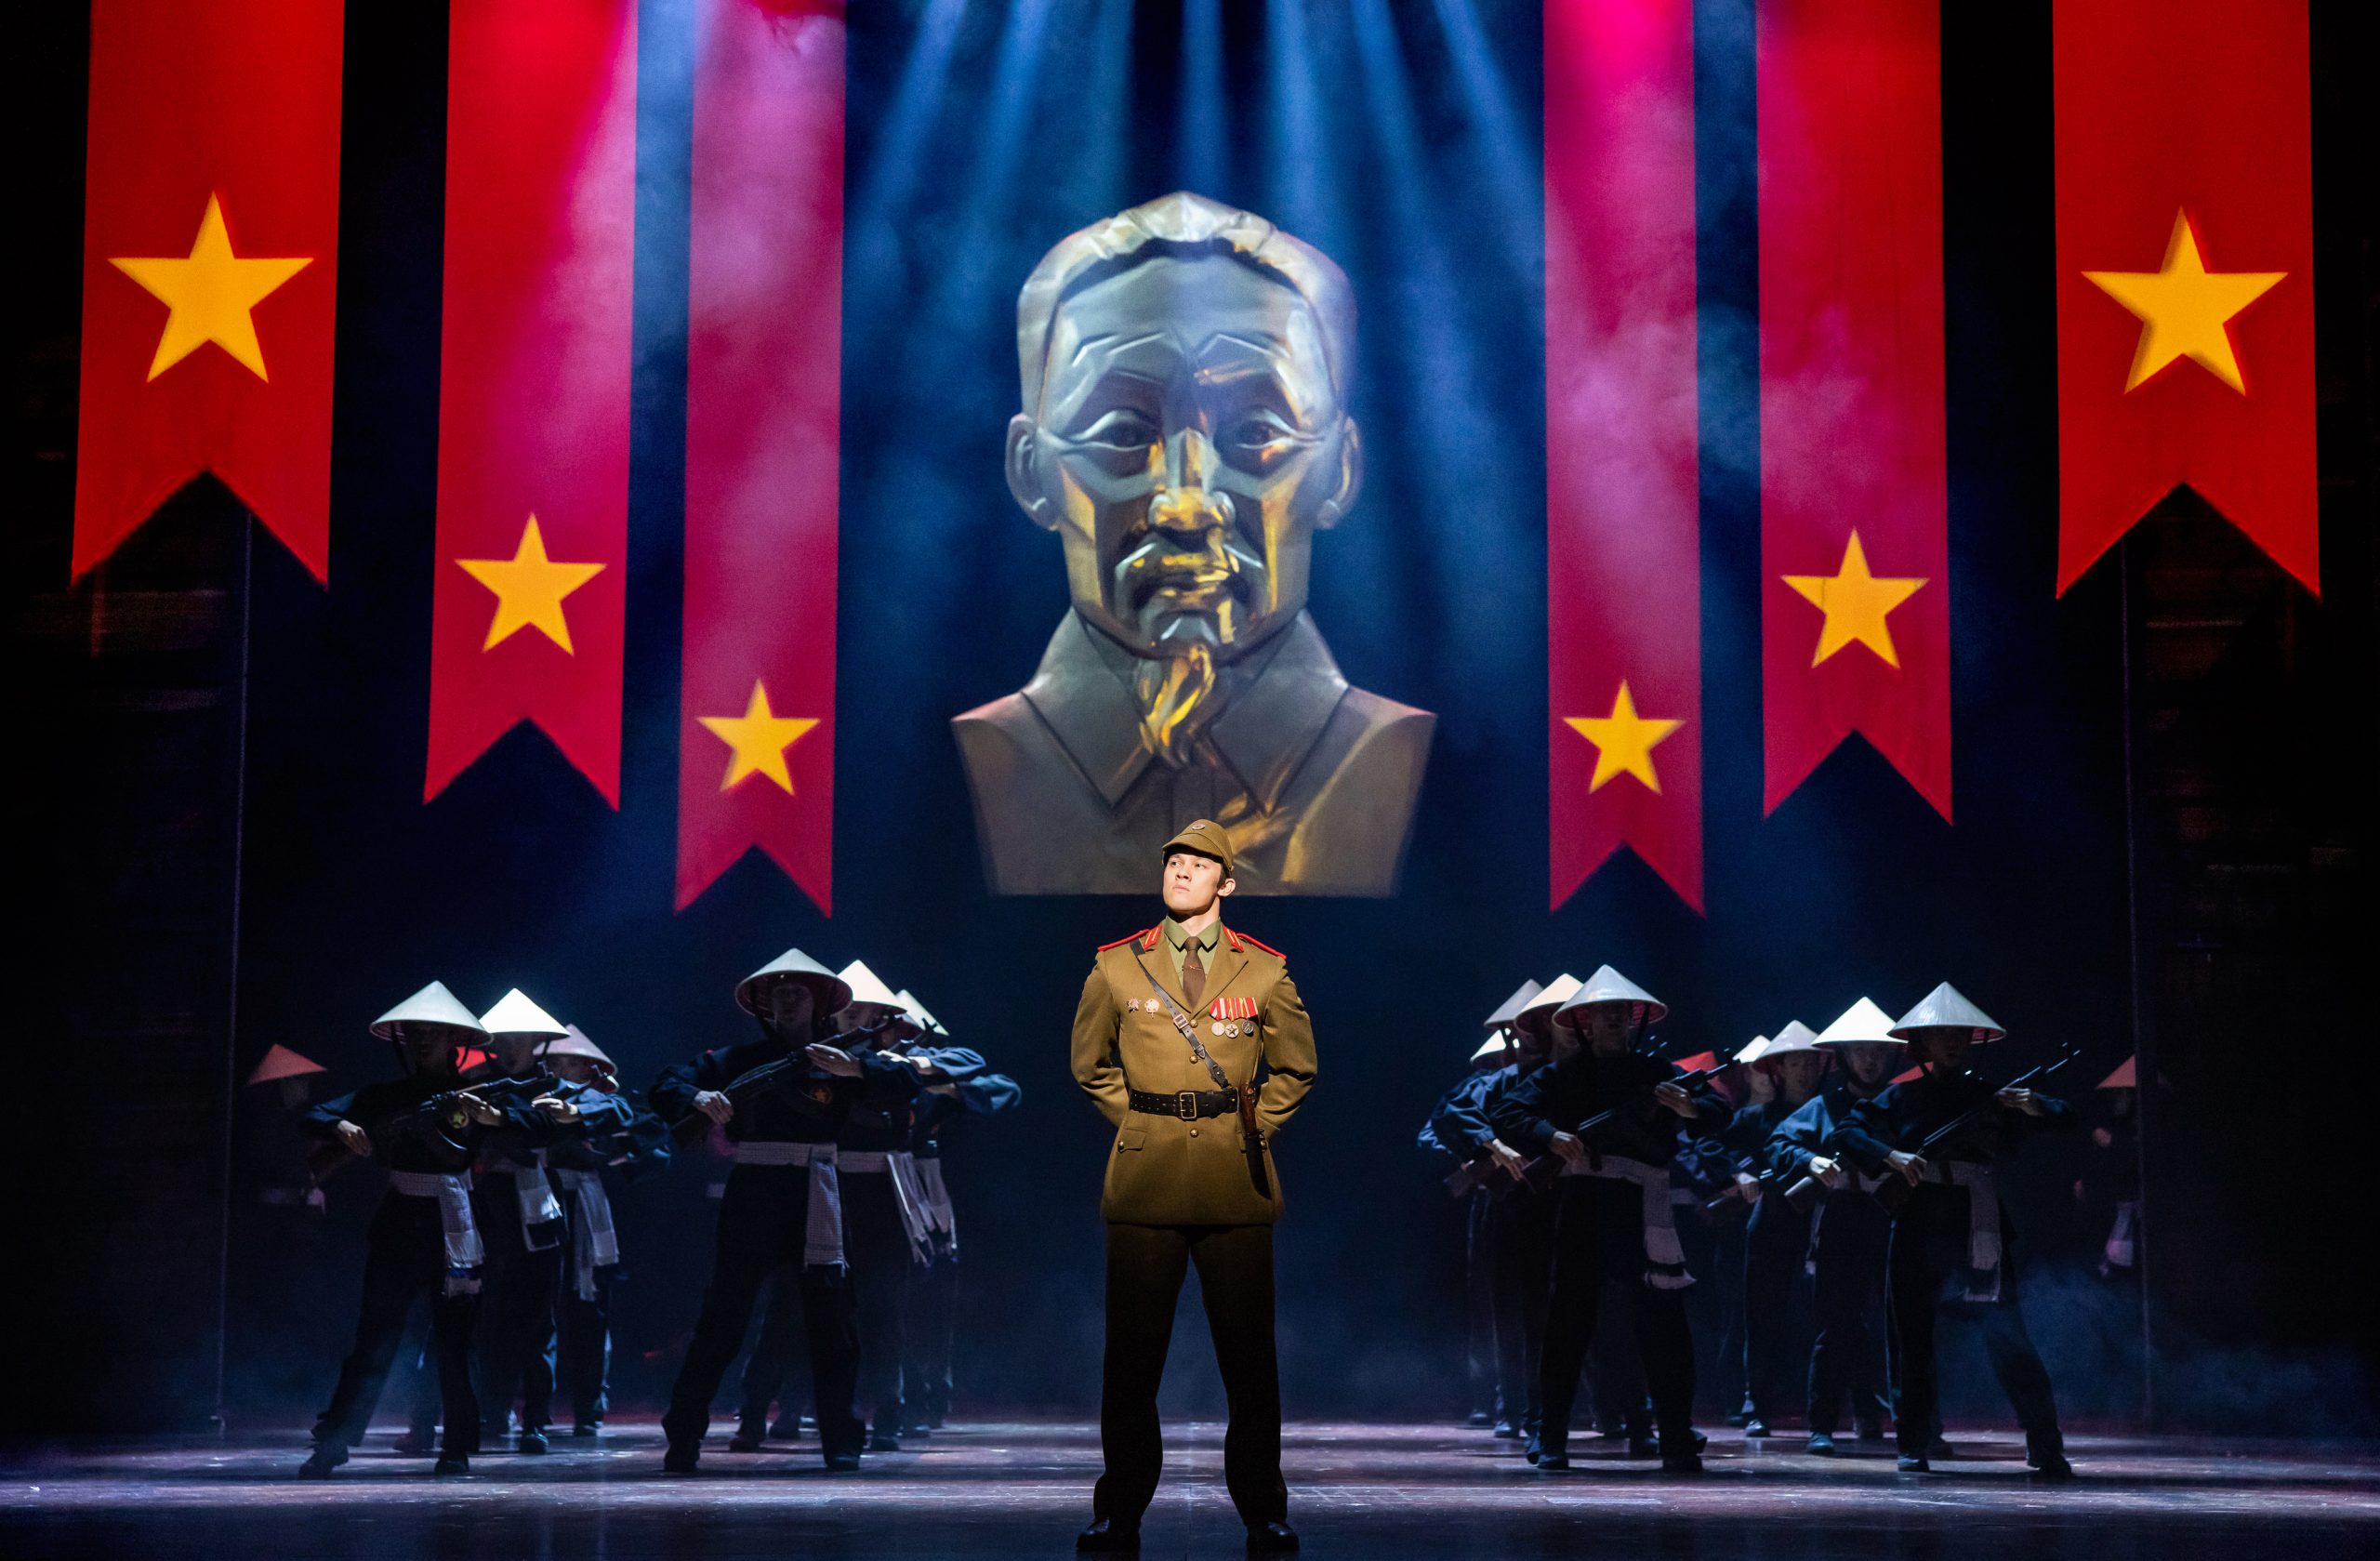 WIN 2x Premium Tickets to Miss Saigon Plus A $100 Voucher for The Star: Kitchen and Bar!